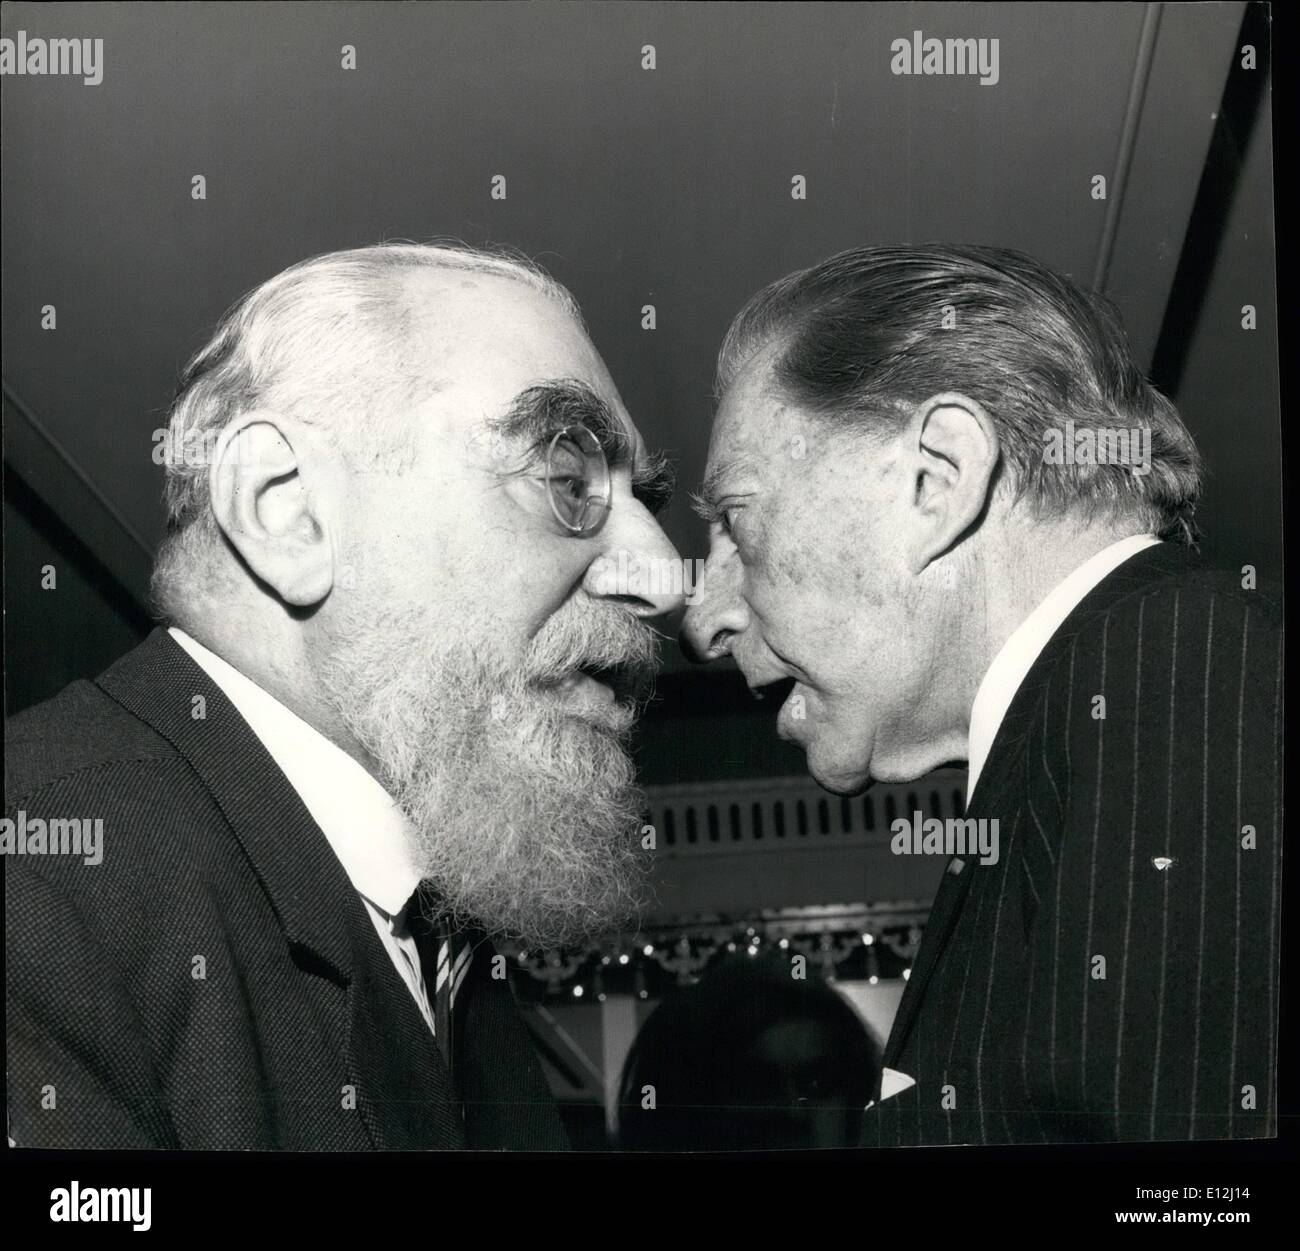 Jan. 09, 2012 - ''How did you make your last Million?'': A nose to nose study of two of the world's richest men - Nubar Gulbenkian (left) and J. Paul Getty, in earnest conversation at a Literary Luncheon in London. Stock Photo